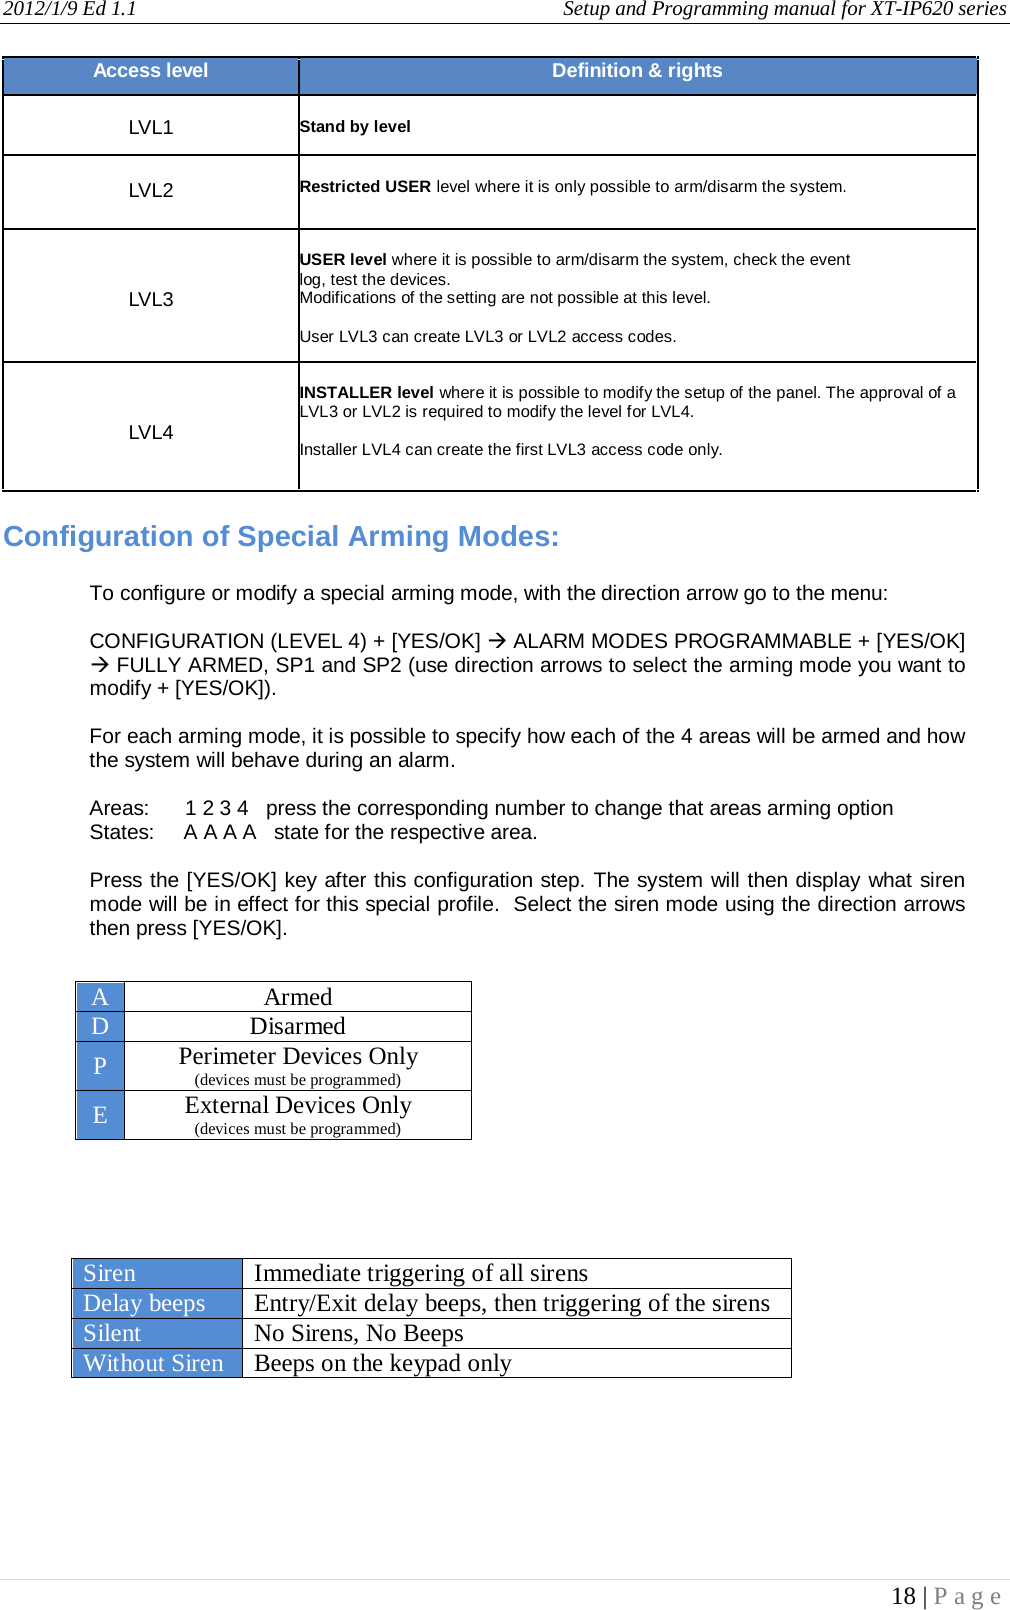 2012/1/9 Ed 1.1     Setup and Programming manual for XT-IP620 series   18 | Page  Access level Definition &amp; rights  LVL1  Stand by level  LVL2  Restricted USER level where it is only possible to arm/disarm the system.    LVL3  USER level where it is possible to arm/disarm the system, check the event log, test the devices. Modifications of the setting are not possible at this level.  User LVL3 can create LVL3 or LVL2 access codes.    LVL4    INSTALLER level where it is possible to modify the setup of the panel. The approval of a LVL3 or LVL2 is required to modify the level for LVL4.  Installer LVL4 can create the first LVL3 access code only.  Configuration of Special Arming Modes:                                A Armed D Disarmed P Perimeter Devices Only  (devices must be programmed) E External Devices Only  (devices must be programmed) Siren Immediate triggering of all sirens Delay beeps Entry/Exit delay beeps, then triggering of the sirens Silent No Sirens, No Beeps Without Siren Beeps on the keypad only To configure or modify a special arming mode, with the direction arrow go to the menu:  CONFIGURATION (LEVEL 4) + [YES/OK]  ALARM MODES PROGRAMMABLE + [YES/OK]  FULLY ARMED, SP1 and SP2 (use direction arrows to select the arming mode you want to modify + [YES/OK]).  For each arming mode, it is possible to specify how each of the 4 areas will be armed and how the system will behave during an alarm.  Areas:      1 2 3 4   press the corresponding number to change that areas arming option     States:     A A A A   state for the respective area.  Press the [YES/OK] key after this configuration step. The system will then display what siren mode will be in effect for this special profile.  Select the siren mode using the direction arrows then press [YES/OK].  